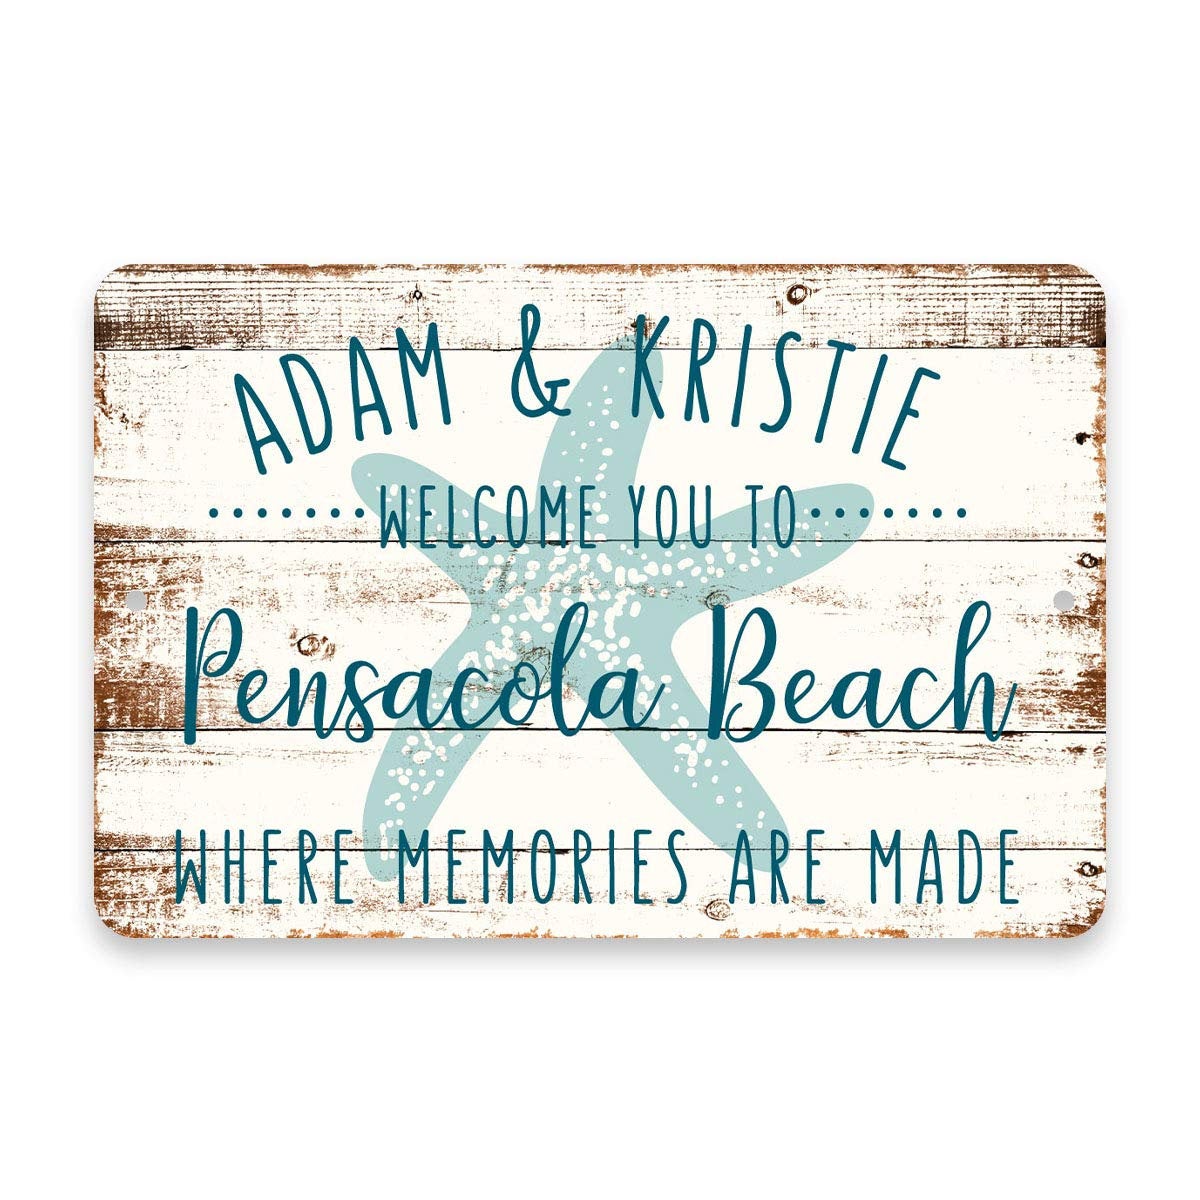 Personalized Welcome to Pensacola Beach Where Memories are Made Sign - 8 X 12 Metal Sign with Wood Look